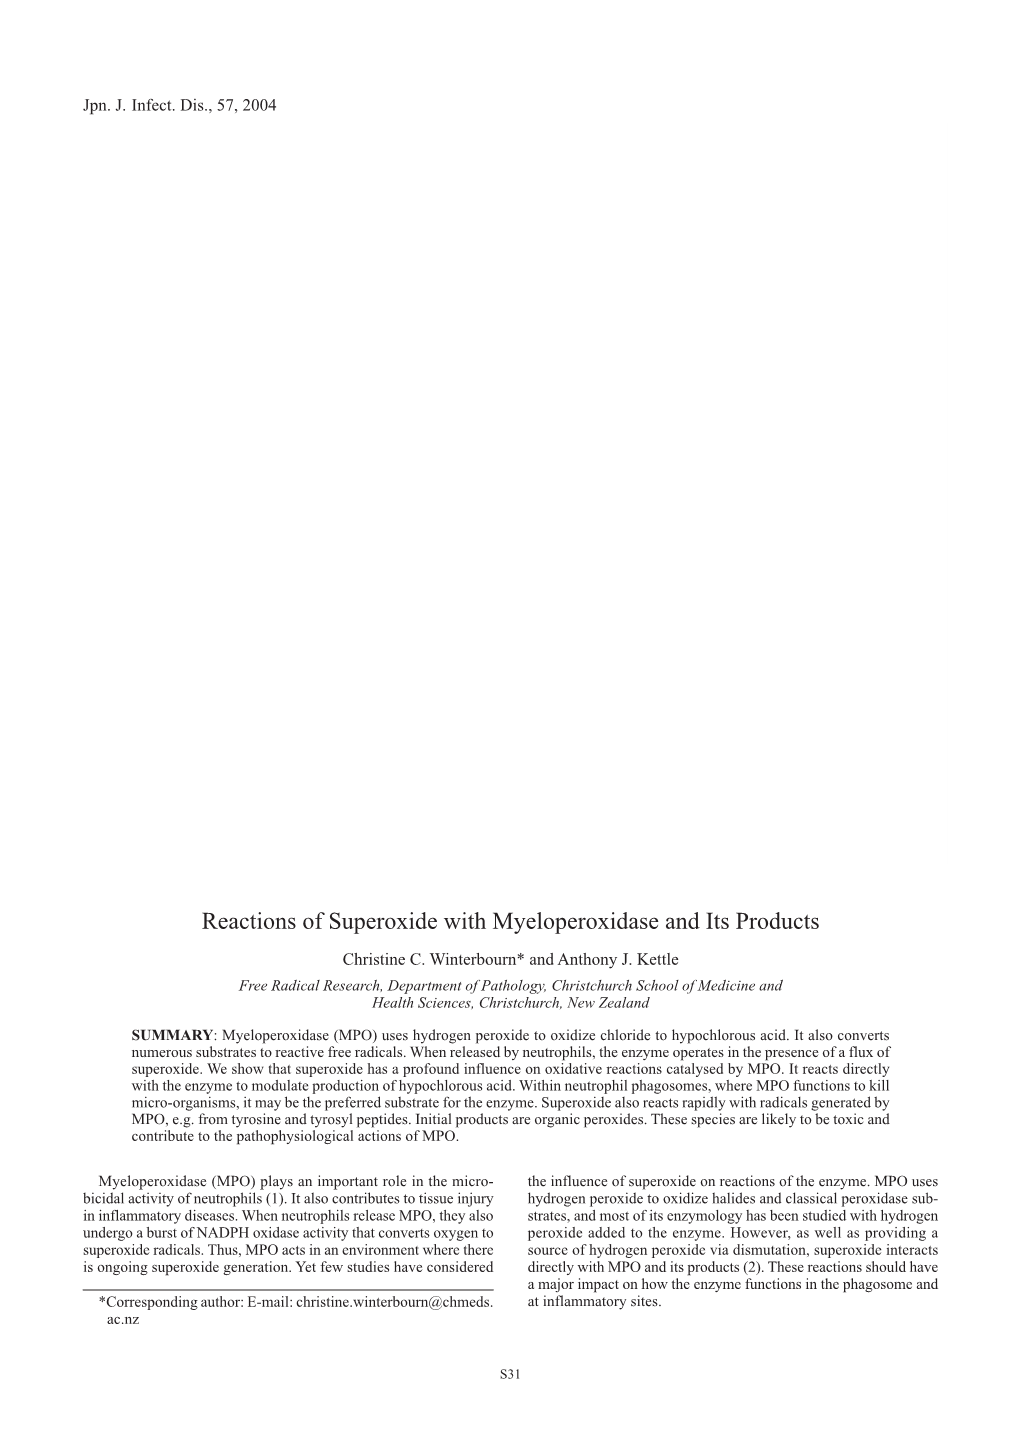 Reactions of Superoxide with Myeloperoxidase and Its Products